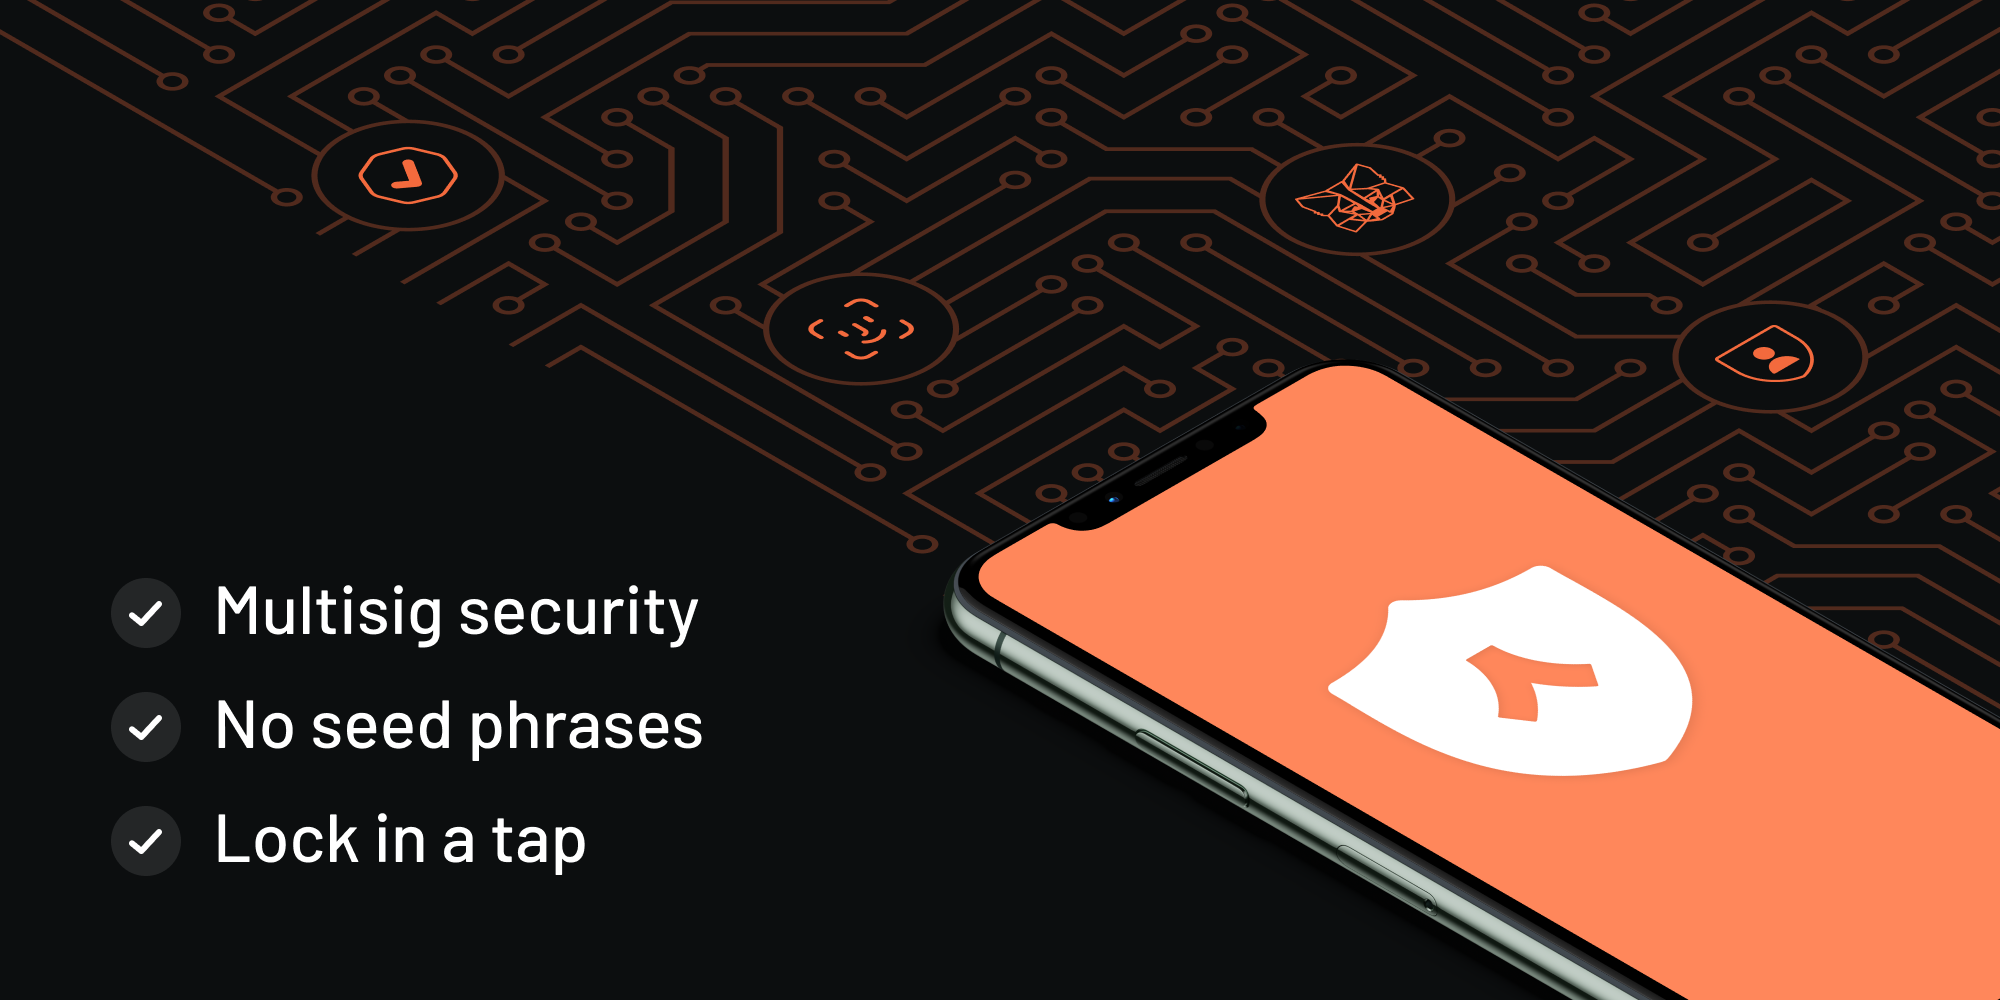 Argent offers multisig security, no seed phrases and lock in a tap